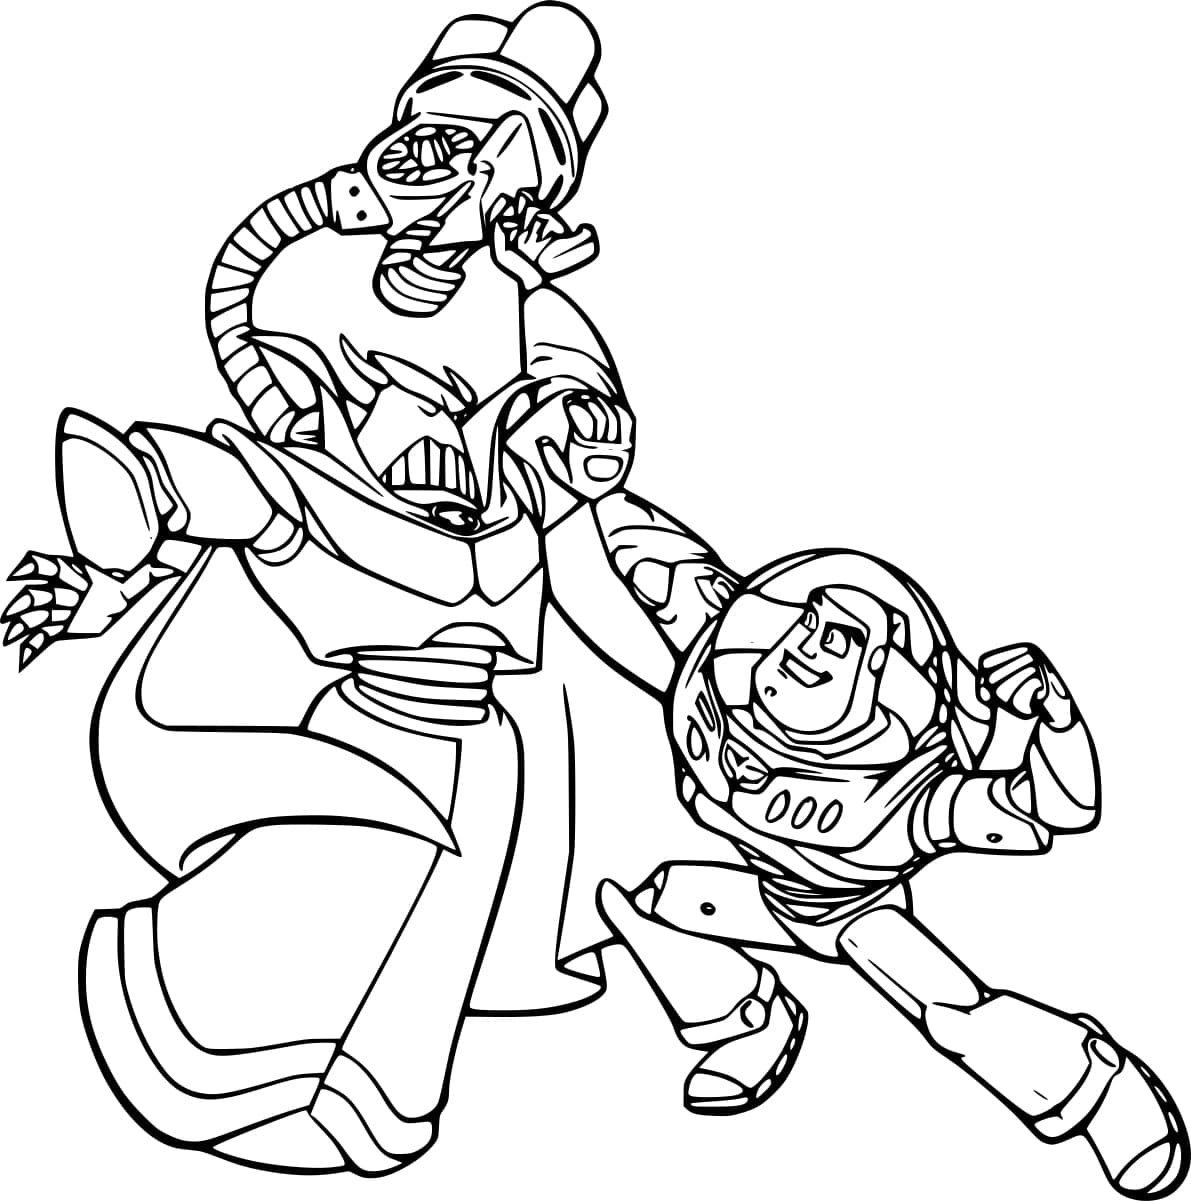 Toy Story 2 Zurg coloring page - Download, Print or Color Online for Free